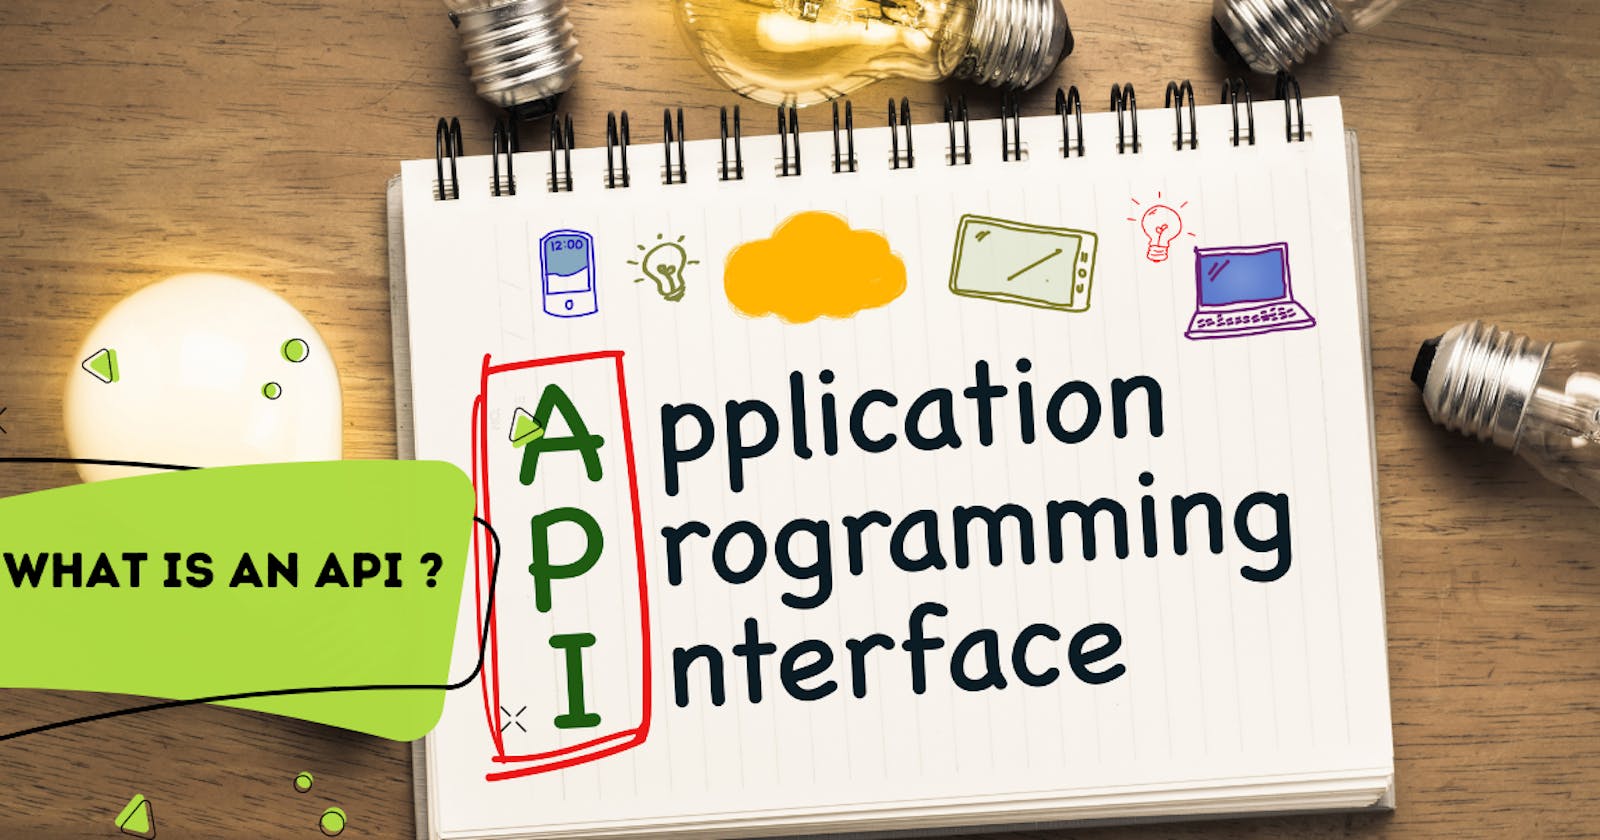 Everything you need to know about APIs